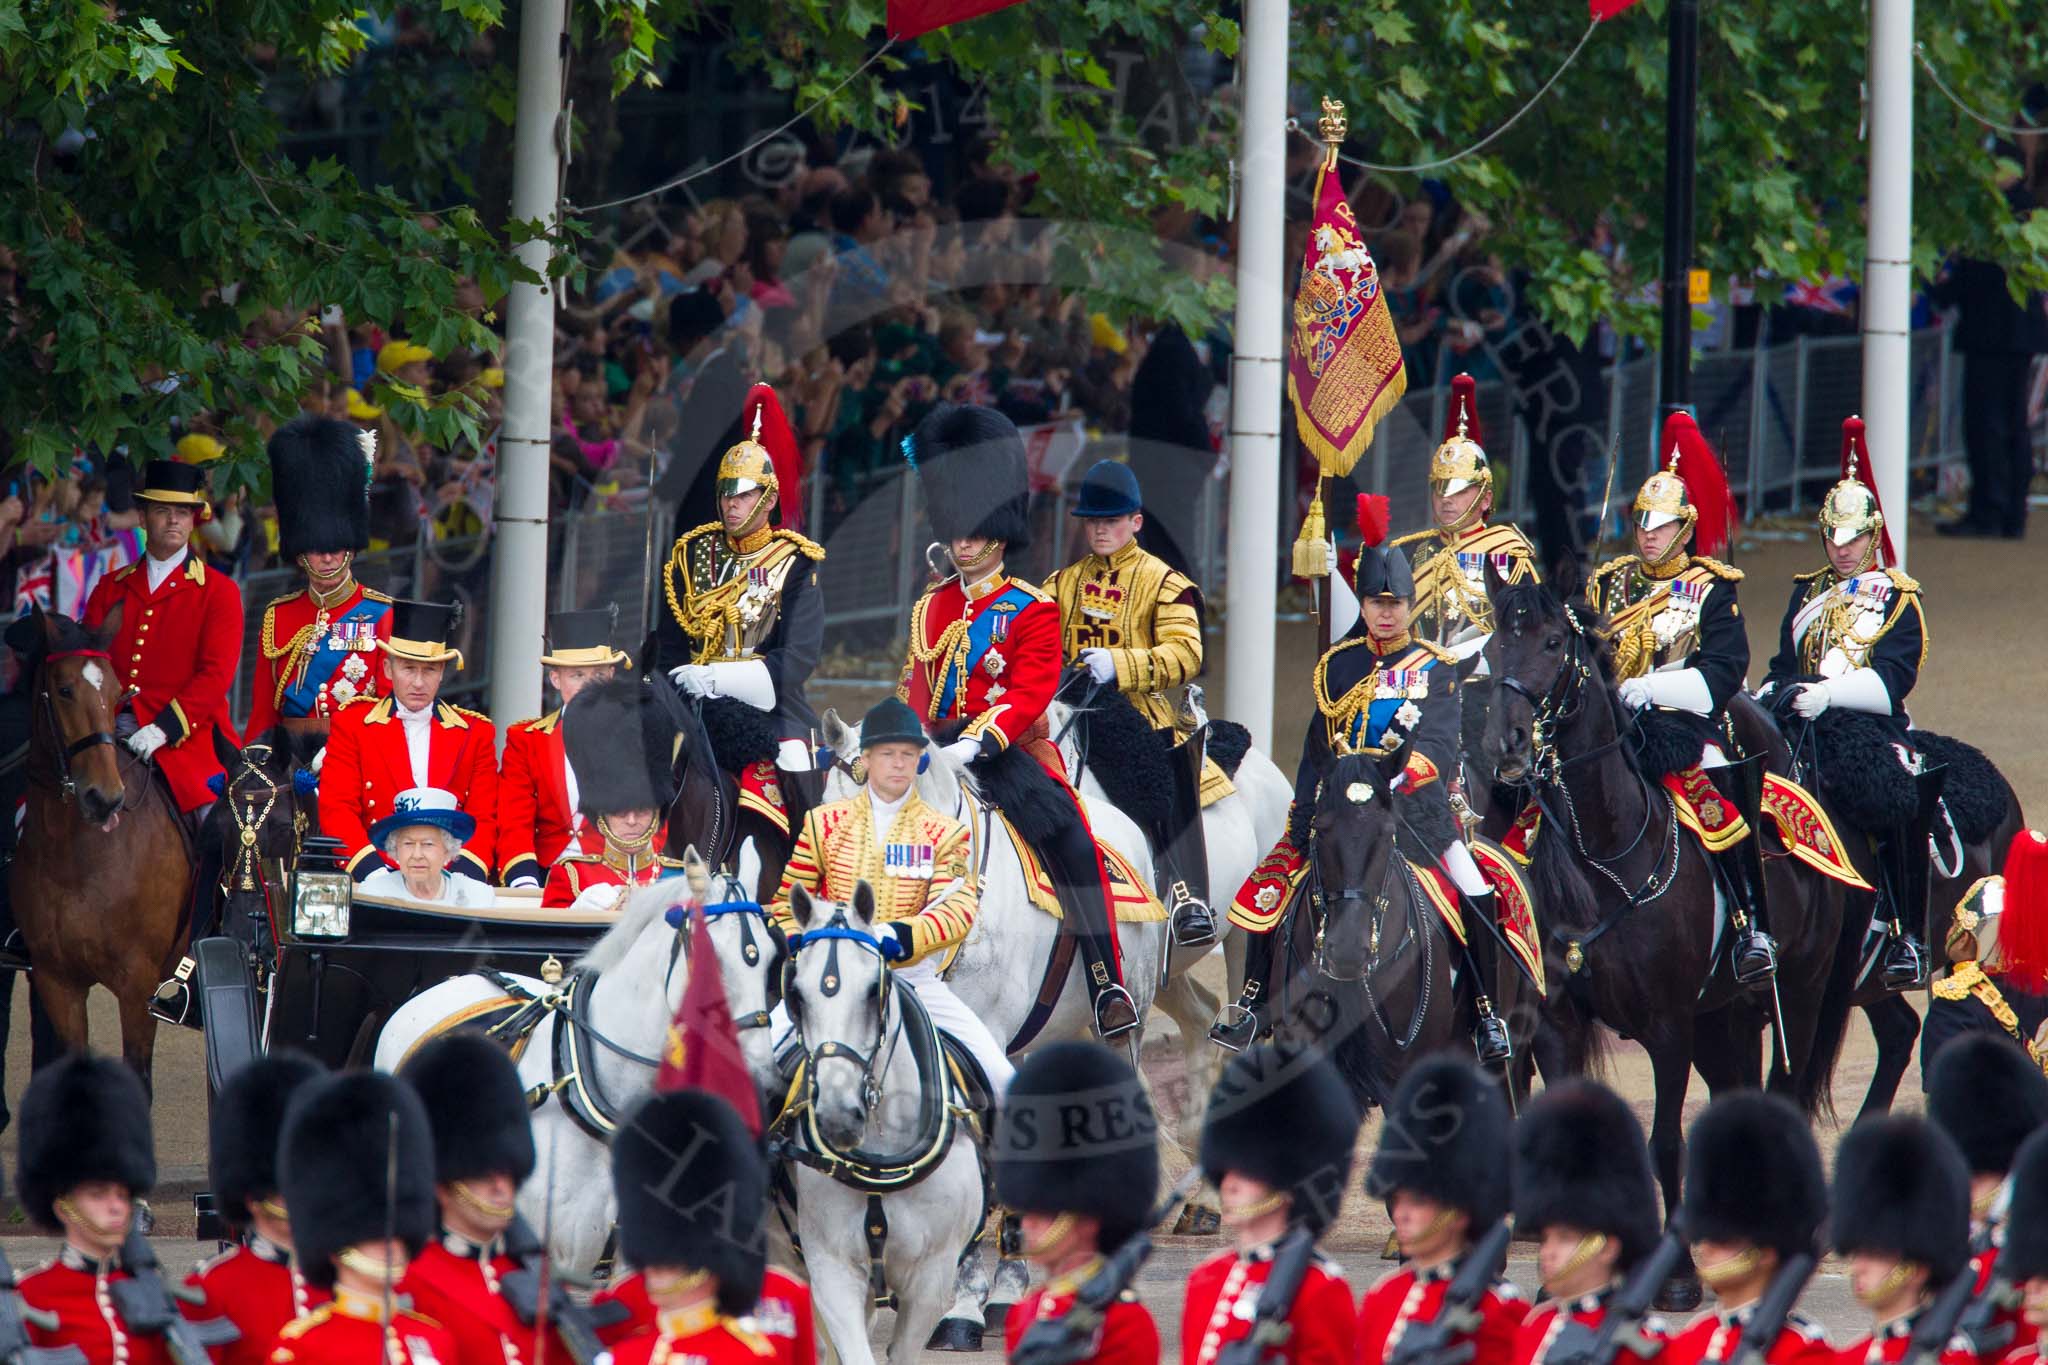 Trooping the Colour 2014.
Horse Guards Parade, Westminster,
London SW1A,

United Kingdom,
on 14 June 2014 at 10:57, image #335